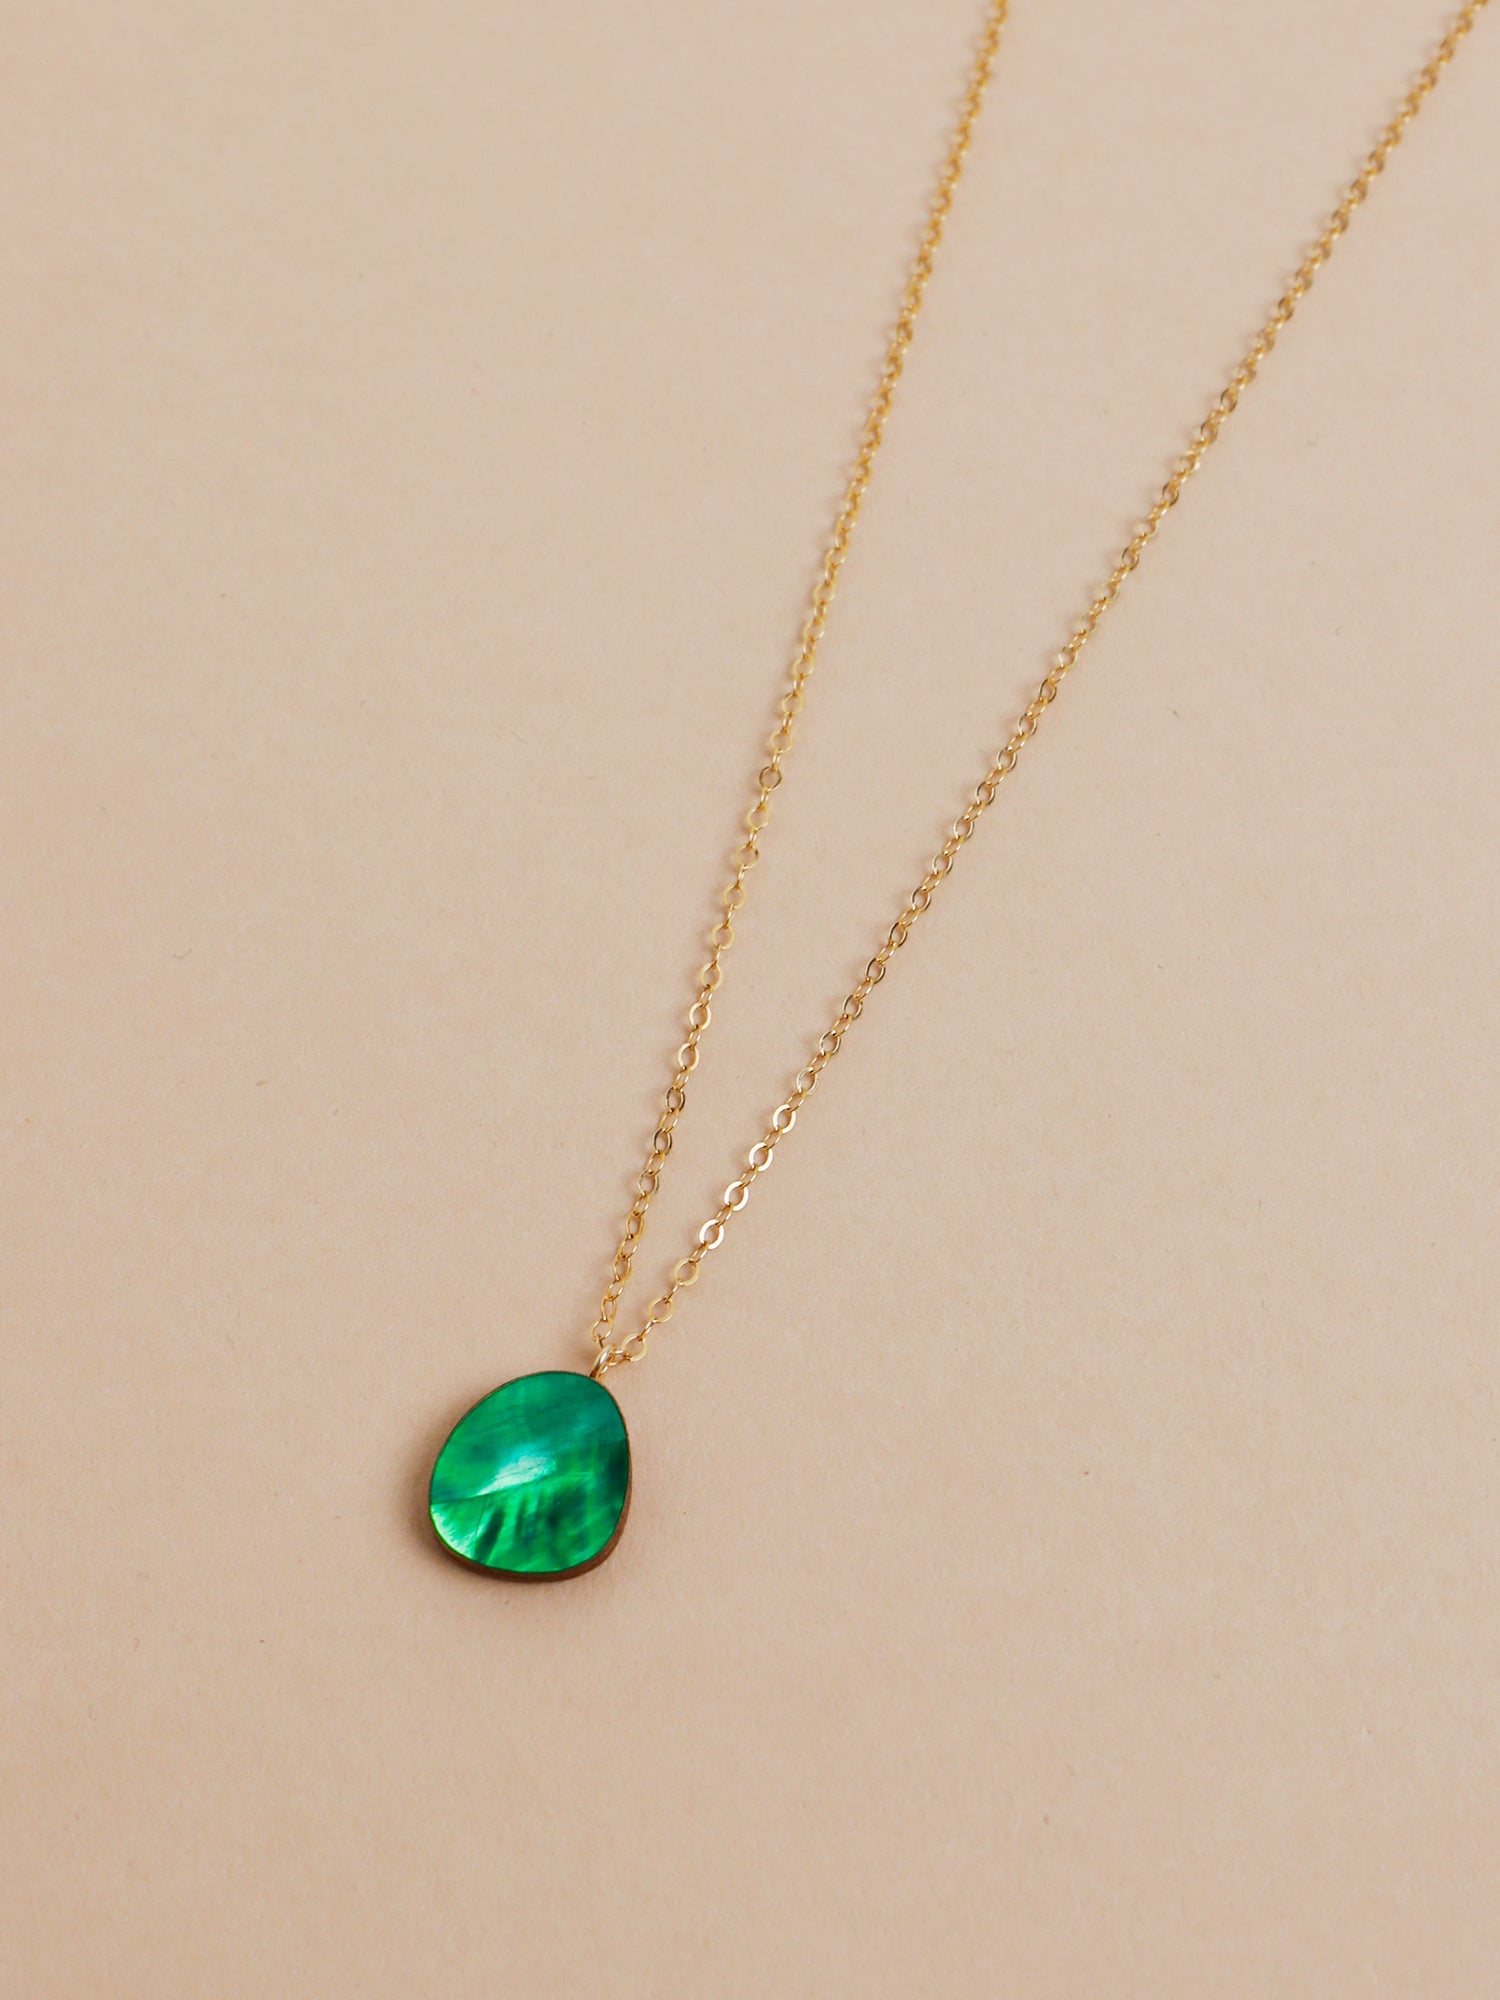 Beatrice Necklace in Emerald. Simple abstract pendant featuring emerald mother of pearl veneer and a 14k gold-filled chain. Handmade in the UK by Wolf & Moon.